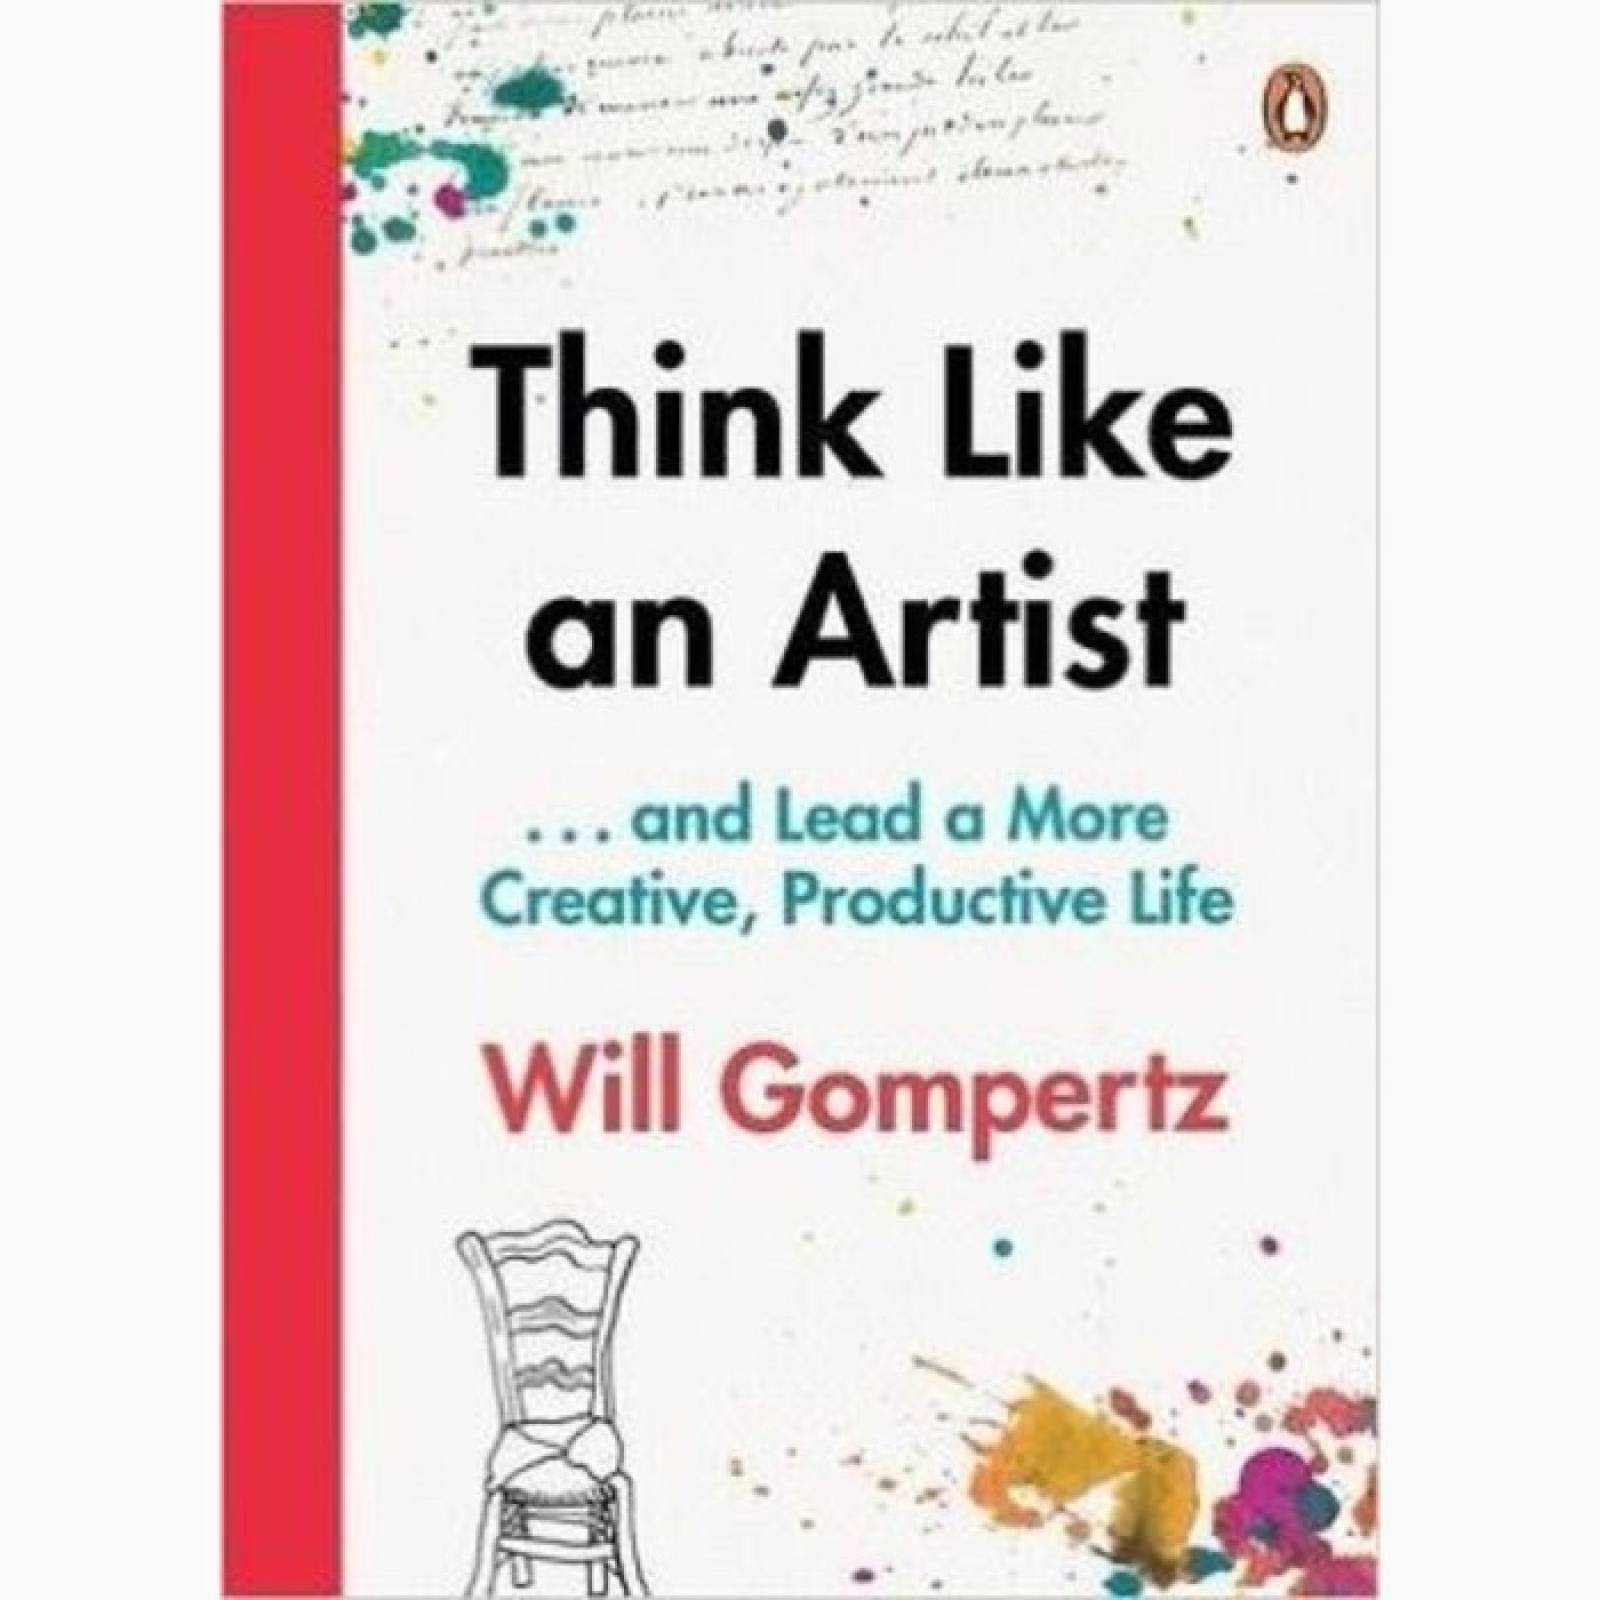 Think Like An Artist By Will Gompertz - Paperback Book